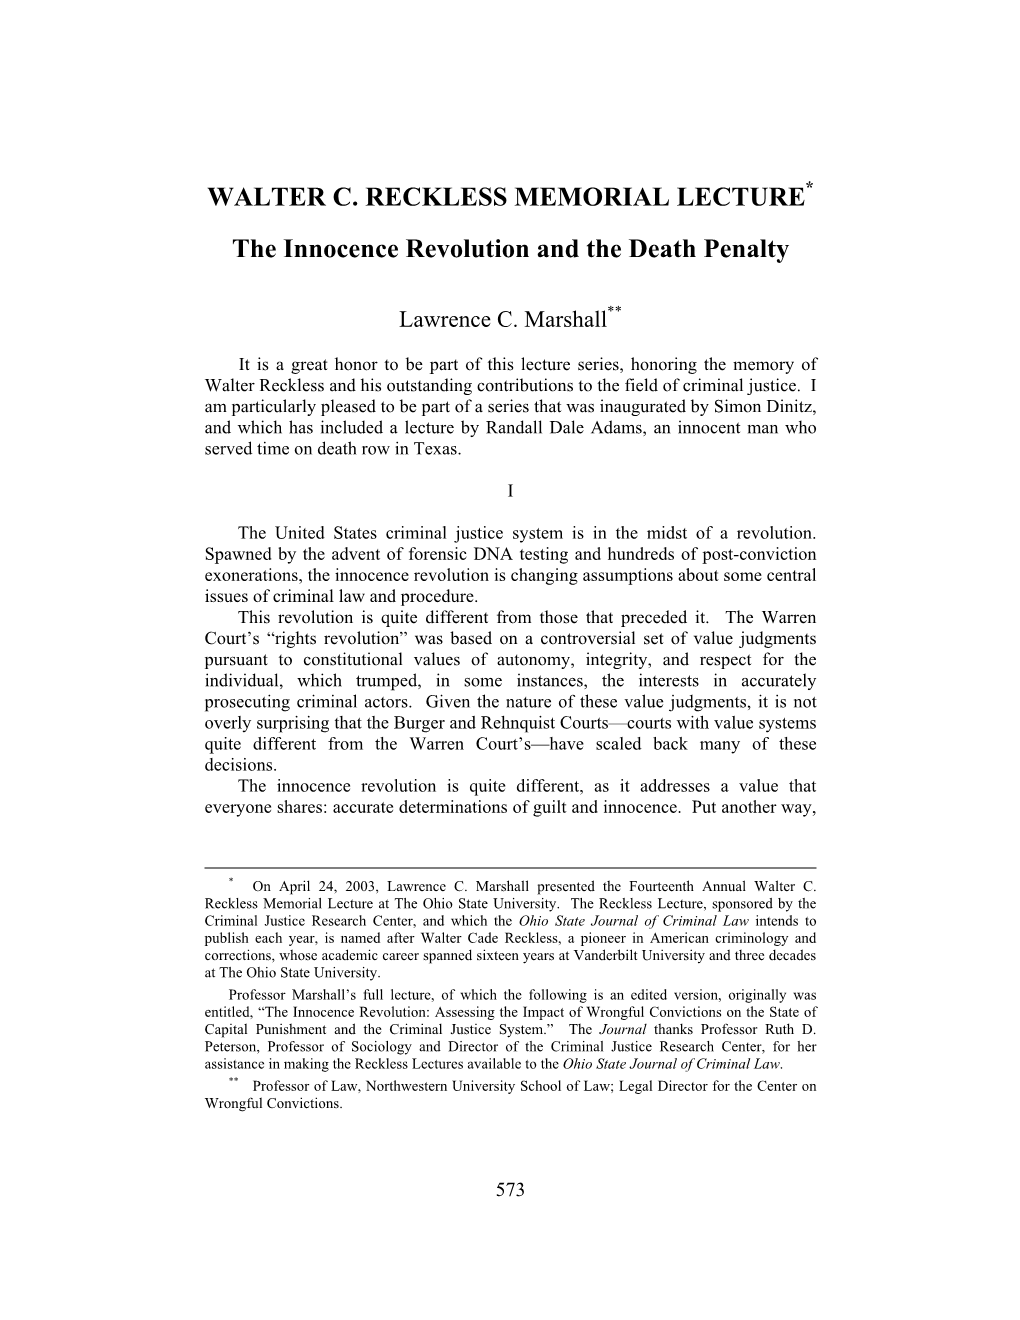 WALTER C. RECKLESS MEMORIAL LECTURE* the Innocence